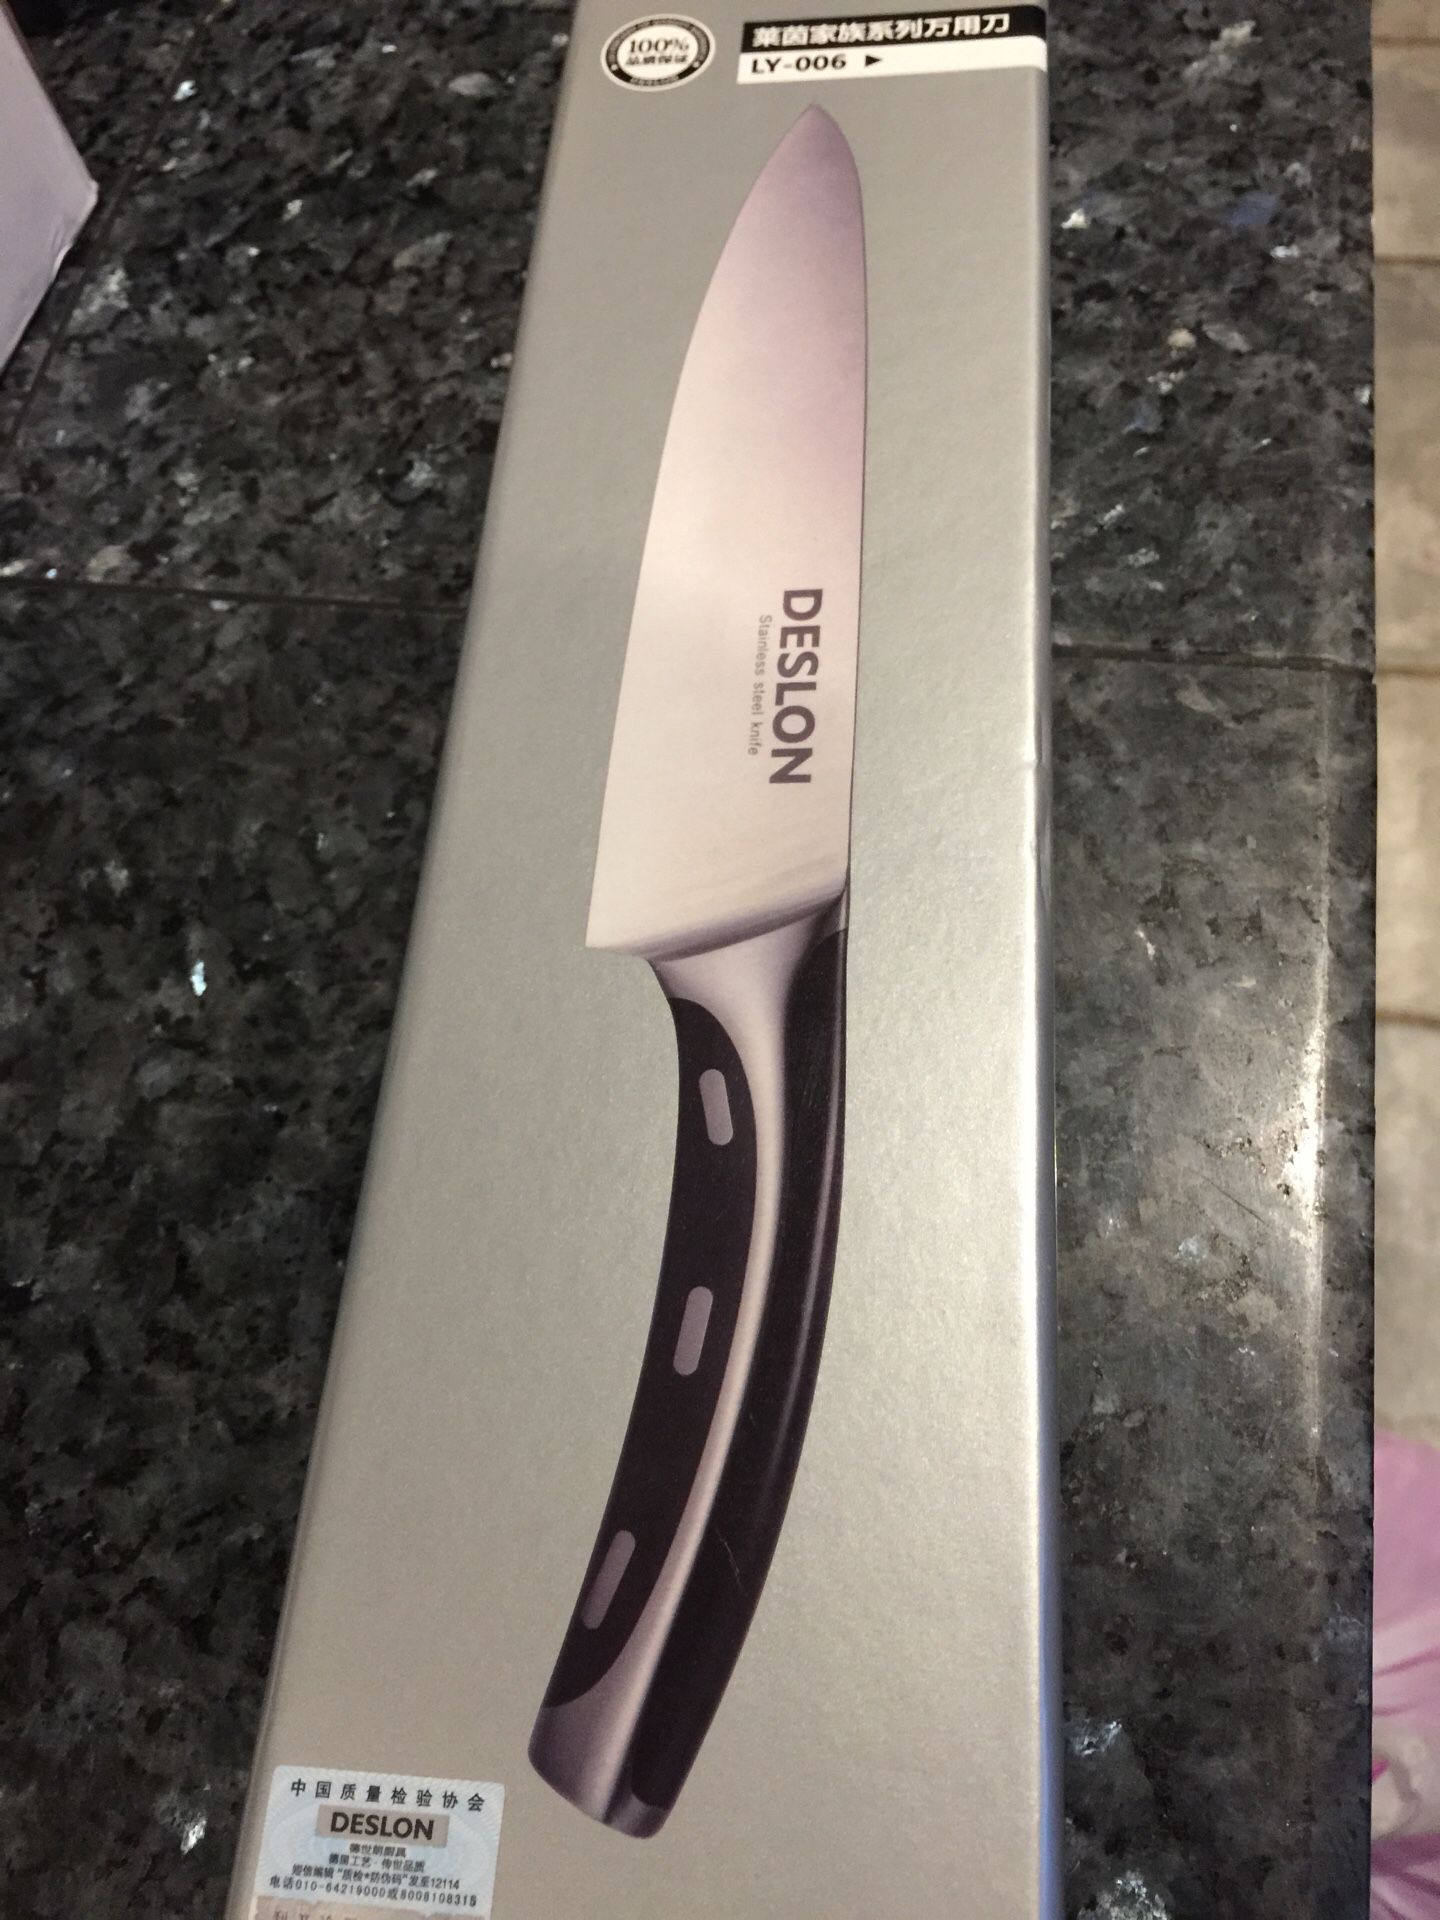 Large stainless steel kitchen knife